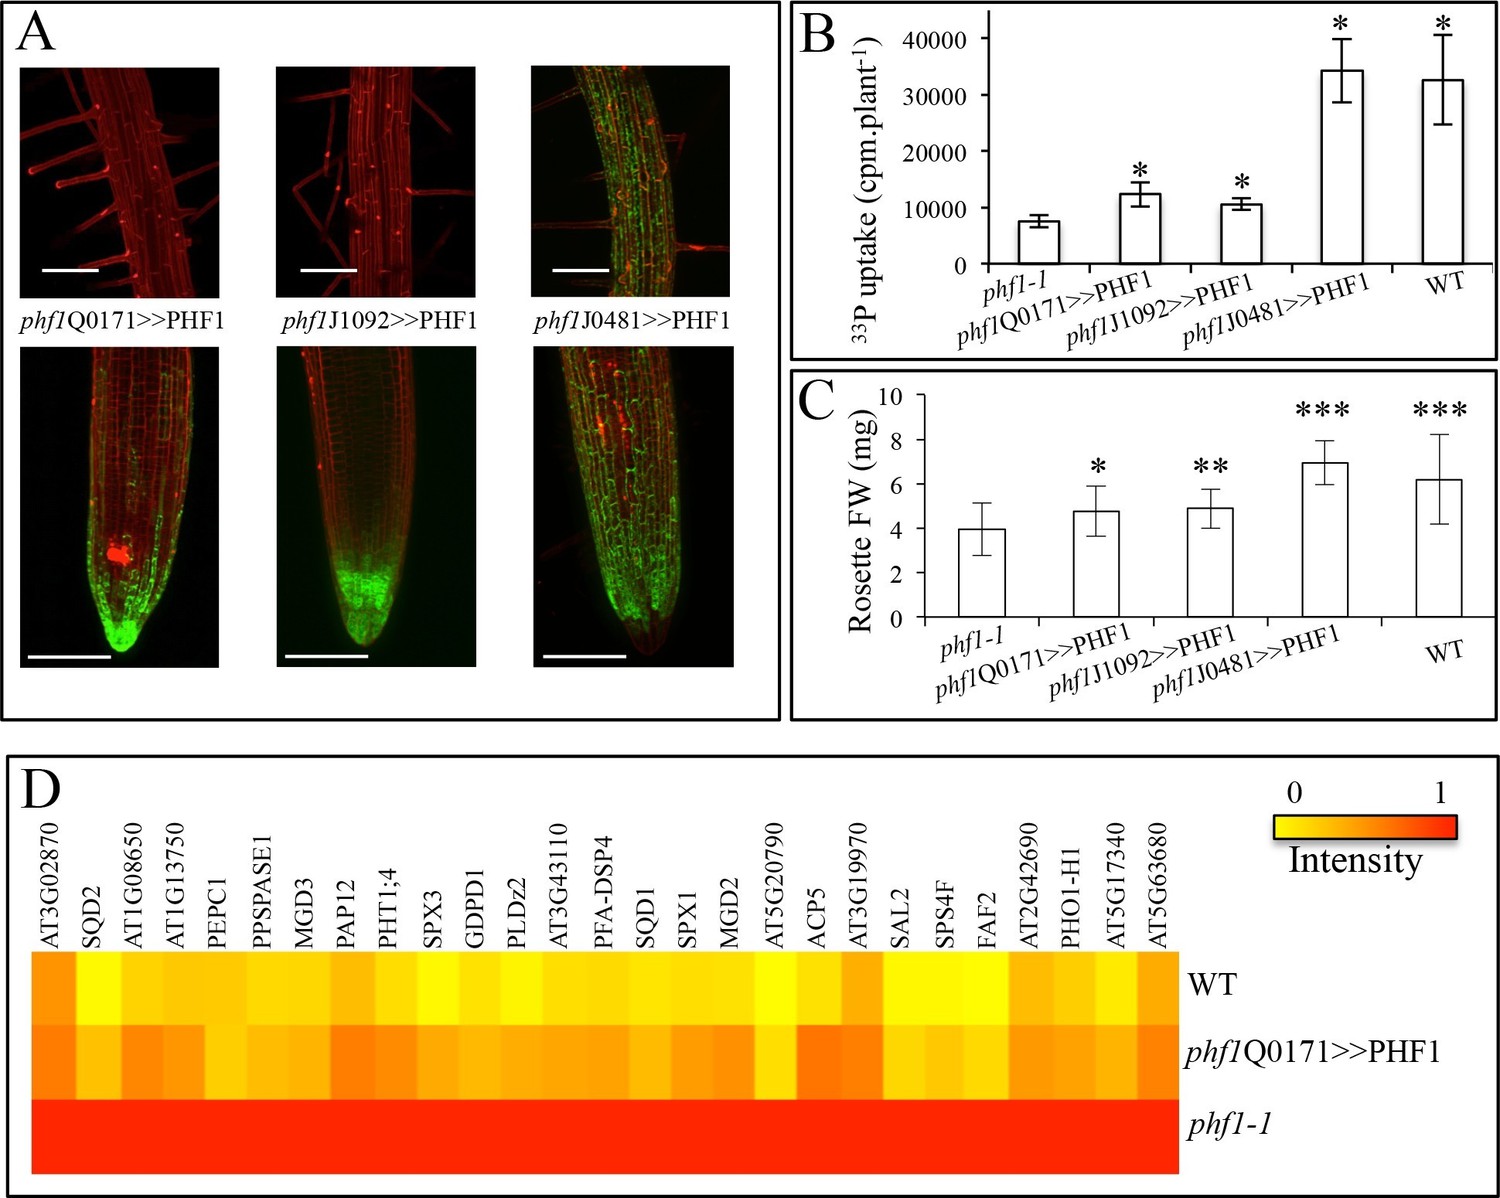 A Novel Role For The Root Cap In Phosphate Uptake And Homeostasis